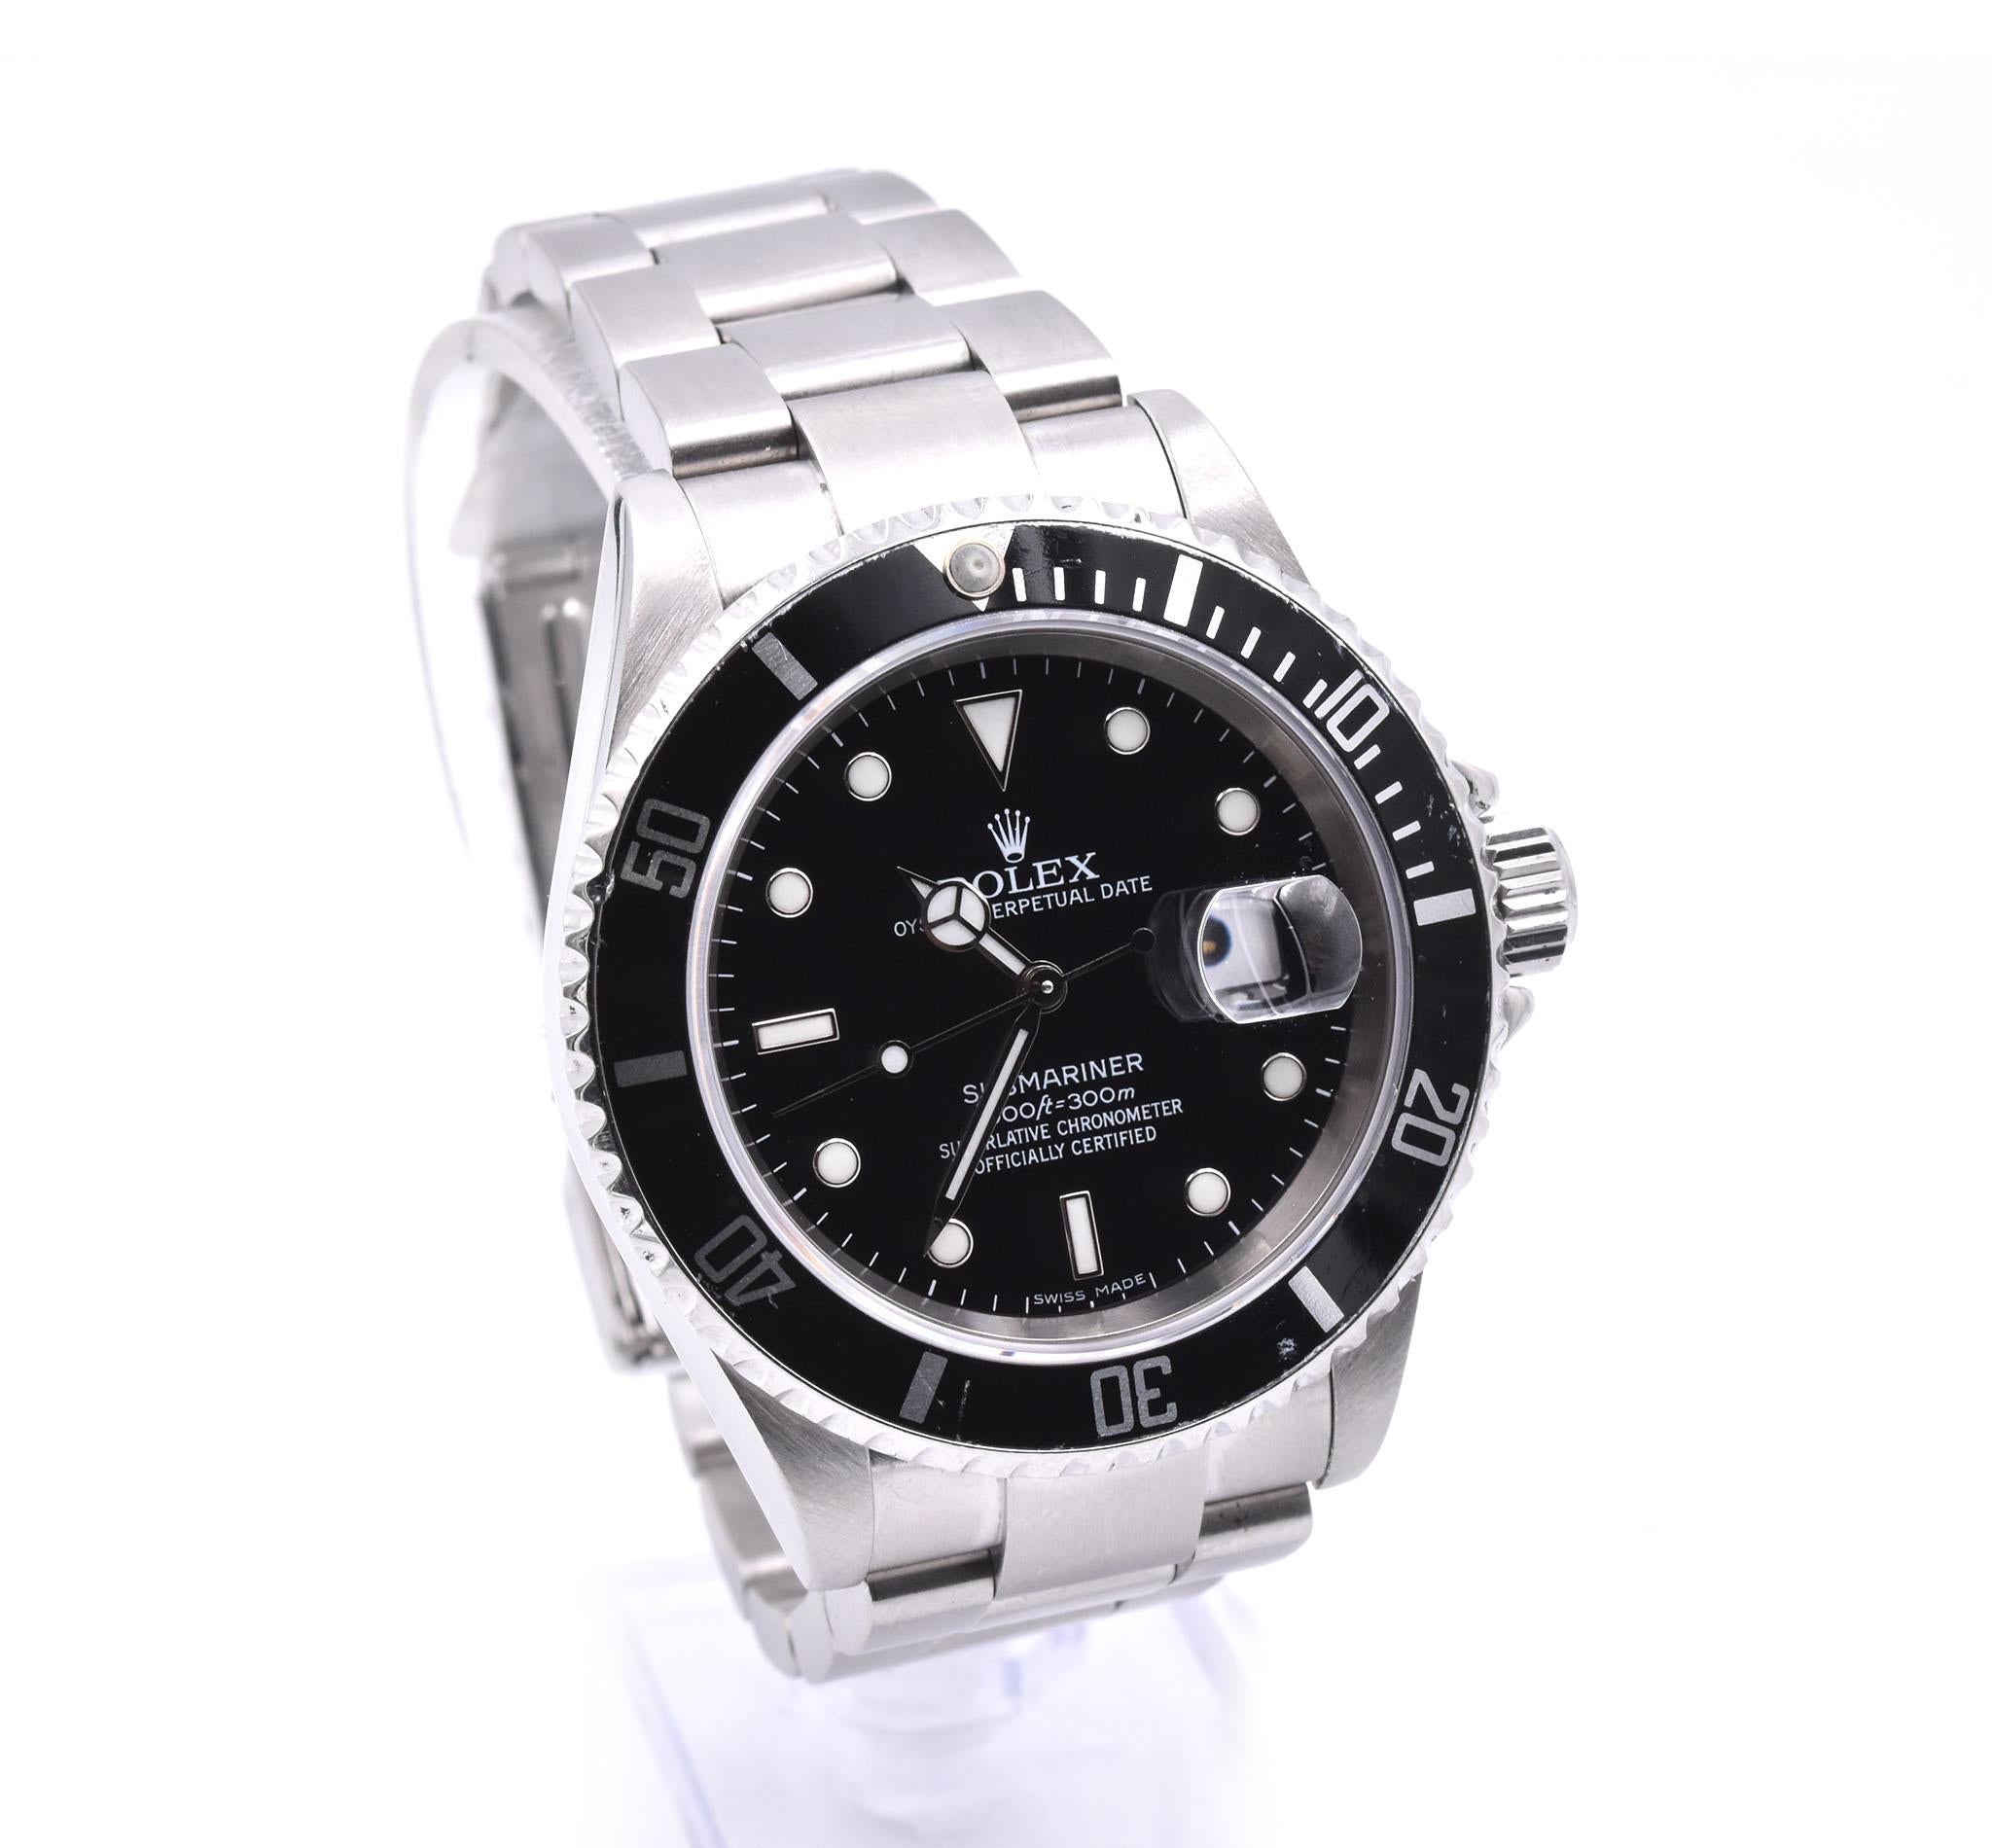 Movement: automatic
Function: hours, minutes, seconds, date
Case: 40mm stainless steel case with back bezel, screw-down crown, sapphire crystal
Band: stainless steel bracelet with locking deployment clasp
Dial: black dial with luminescent hands and